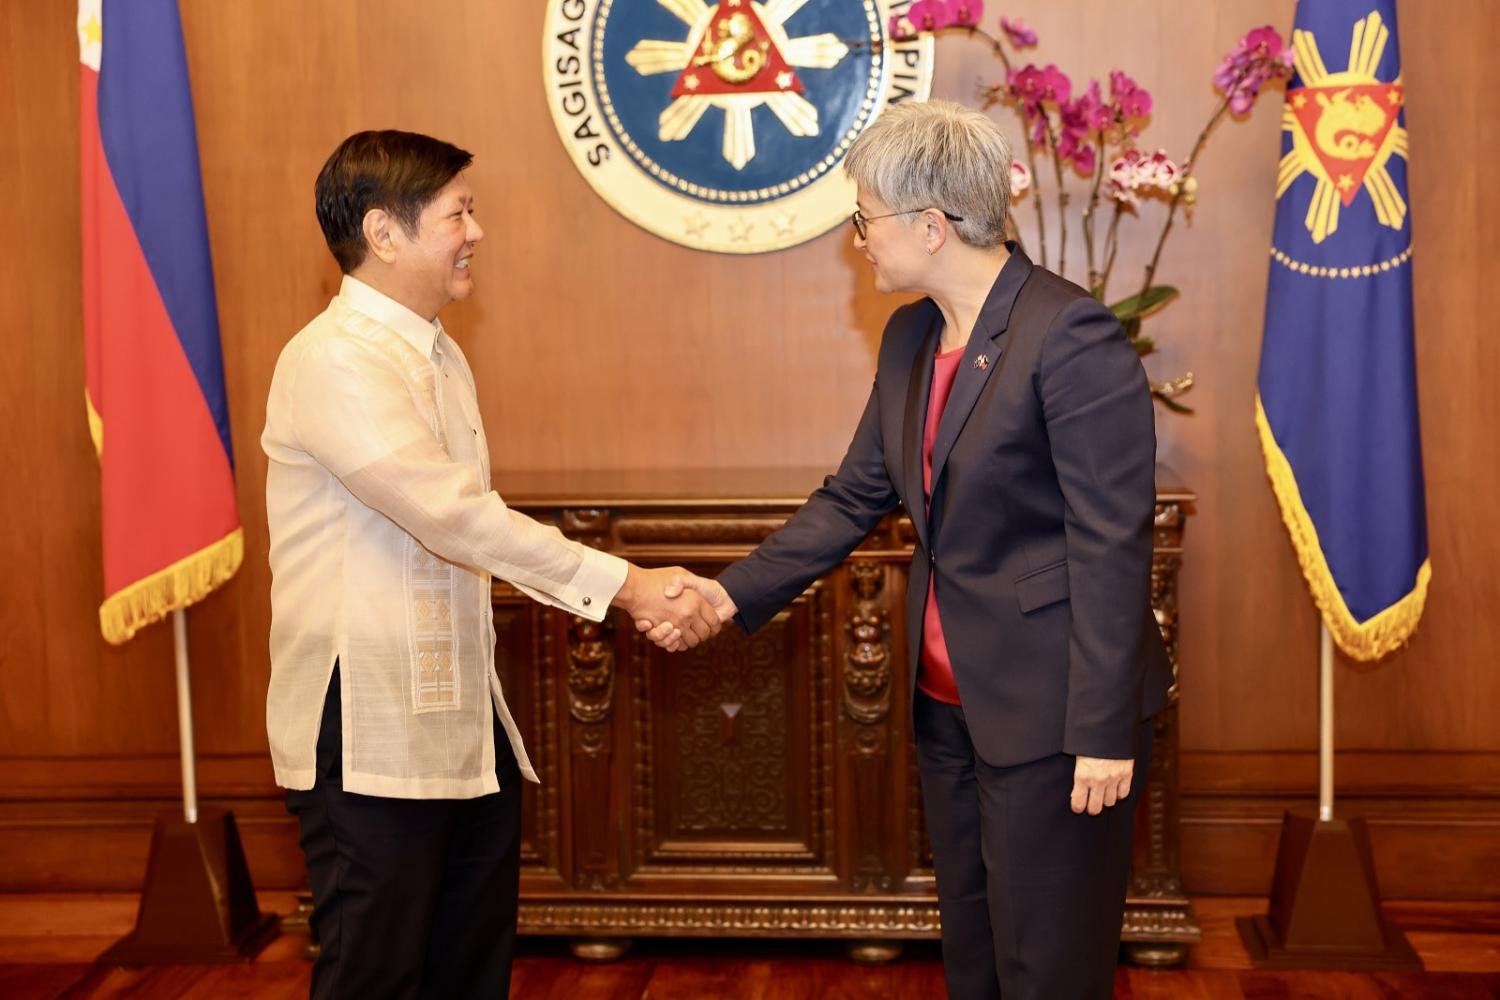 Australian Foreign Minister Penny Wong (R) made a courtesy call on Philippines President Ferdinand Marcos Jr earlier this year (Sarah Friend/DFAT)